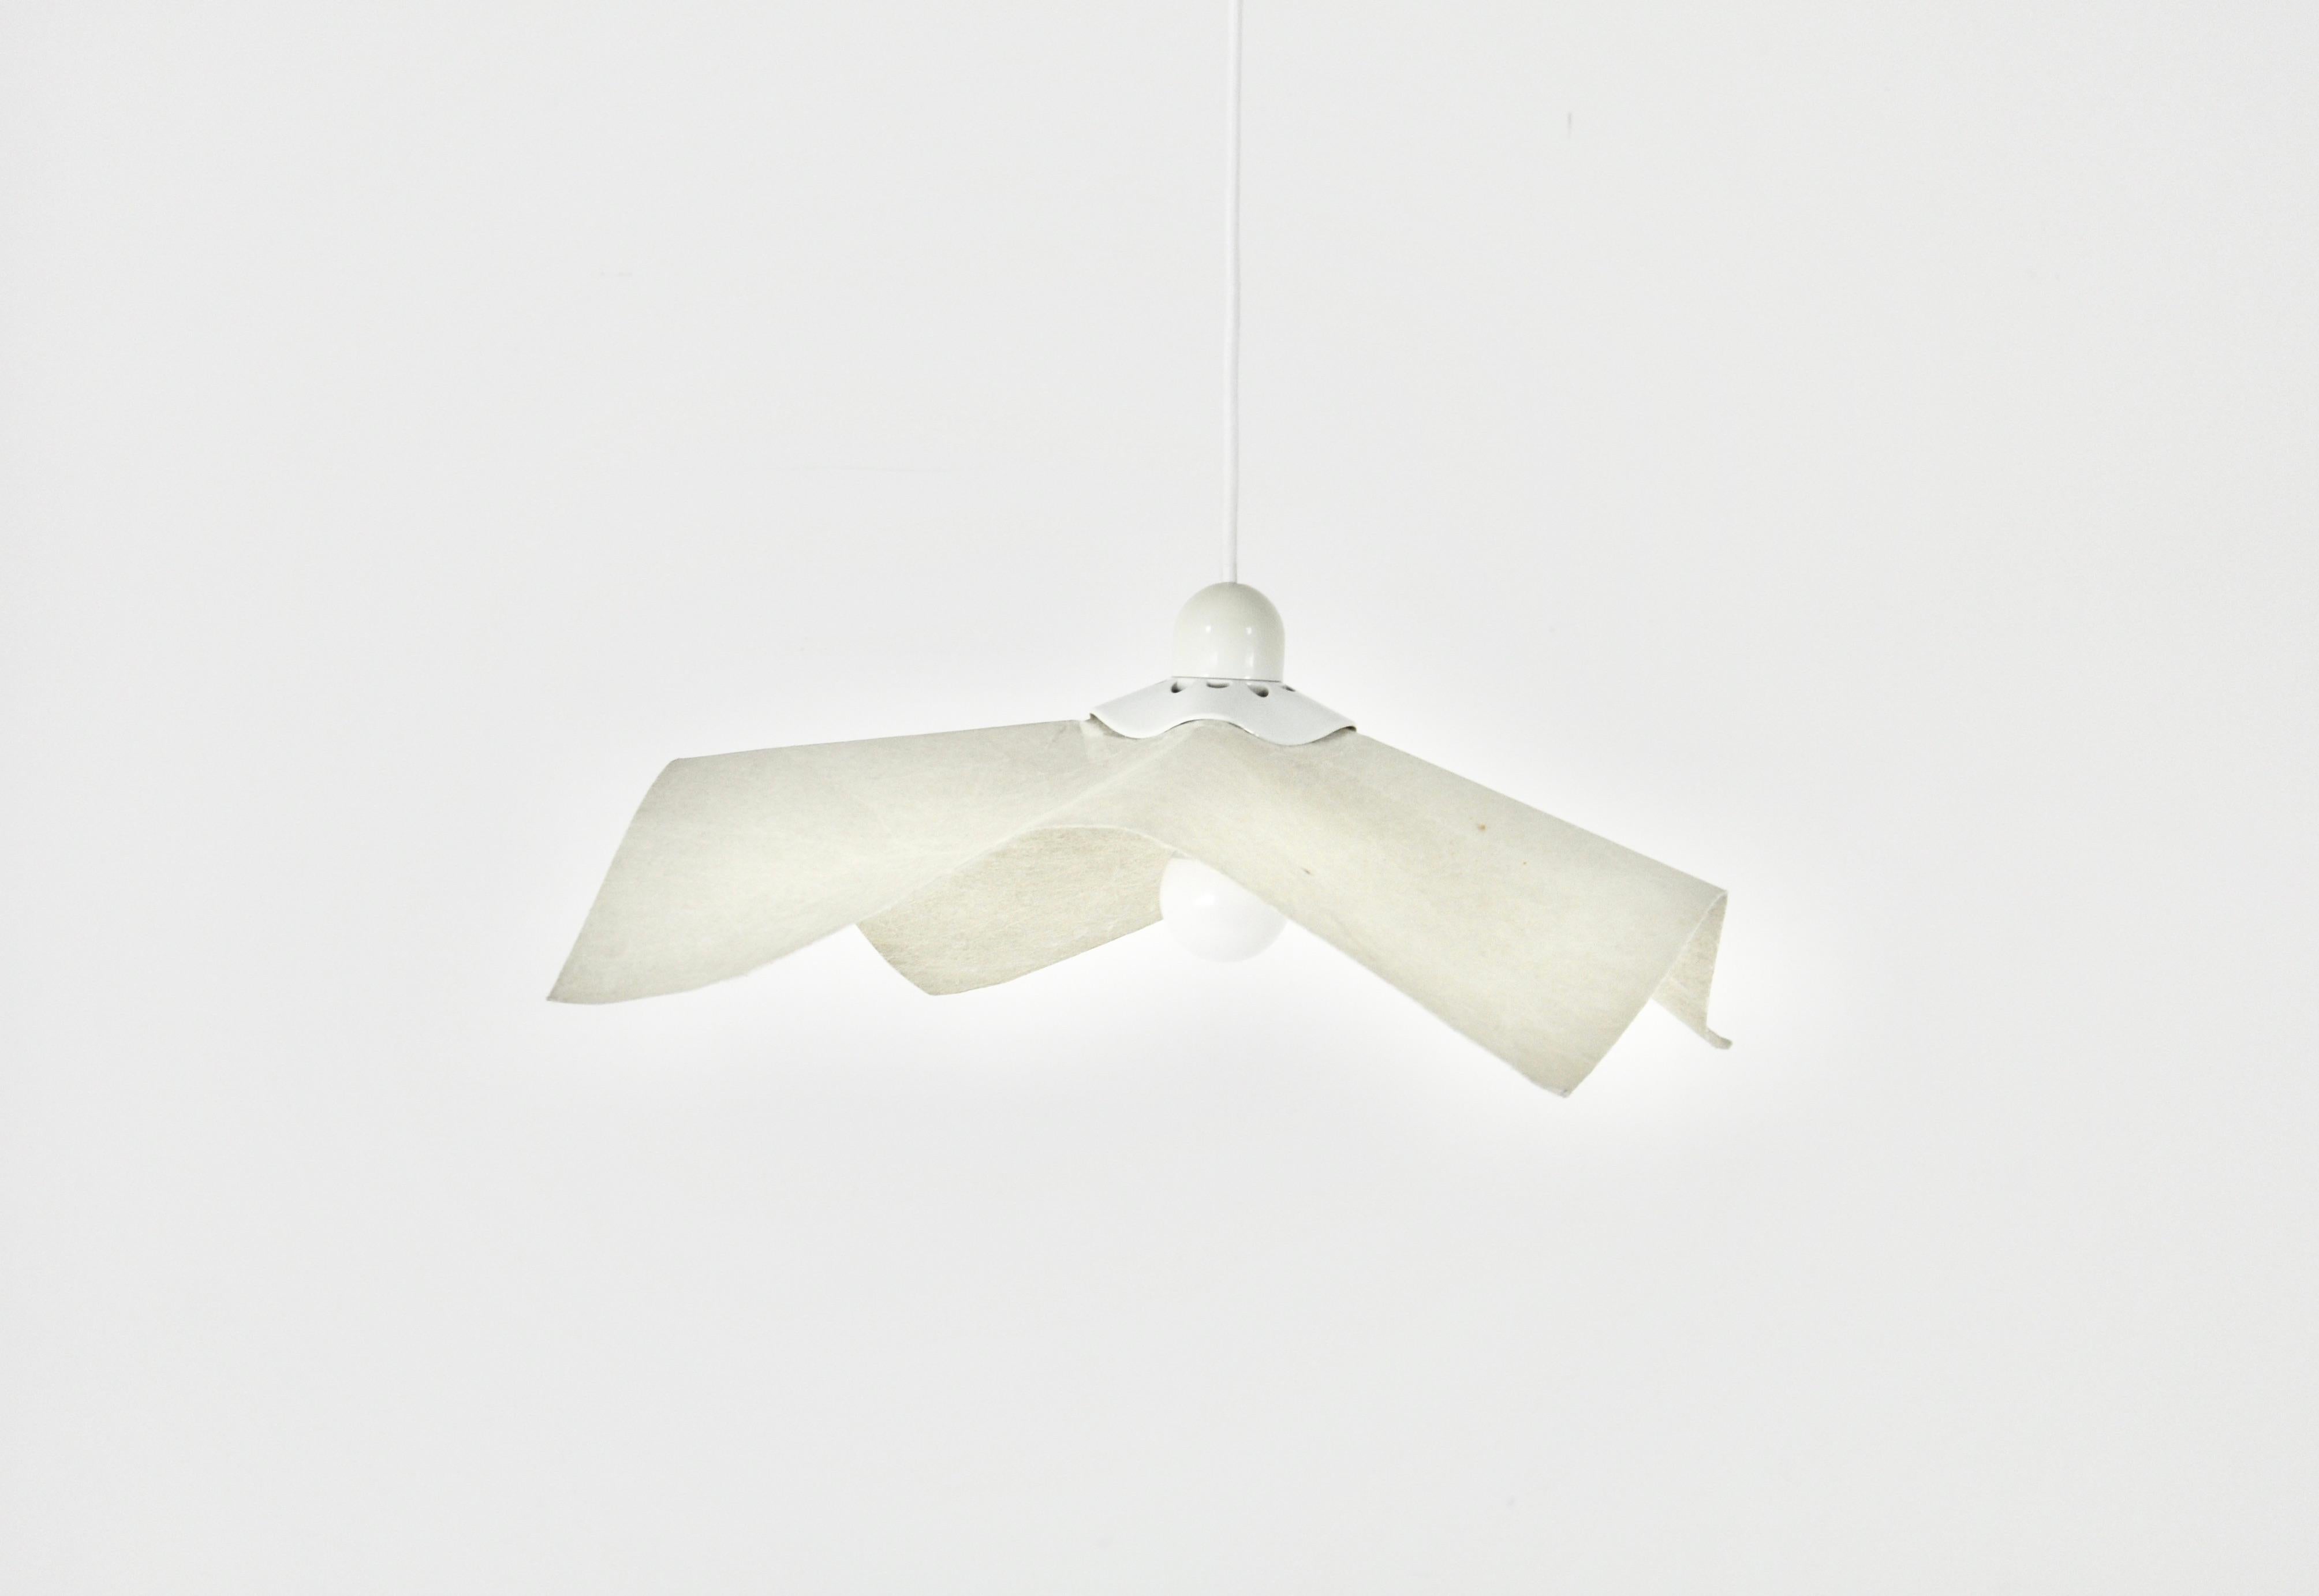 Paper and plastic hanging lamp by Mario Bellini, model: Area 50. Maximum height with cable: 240 cm. Wear due to time and age